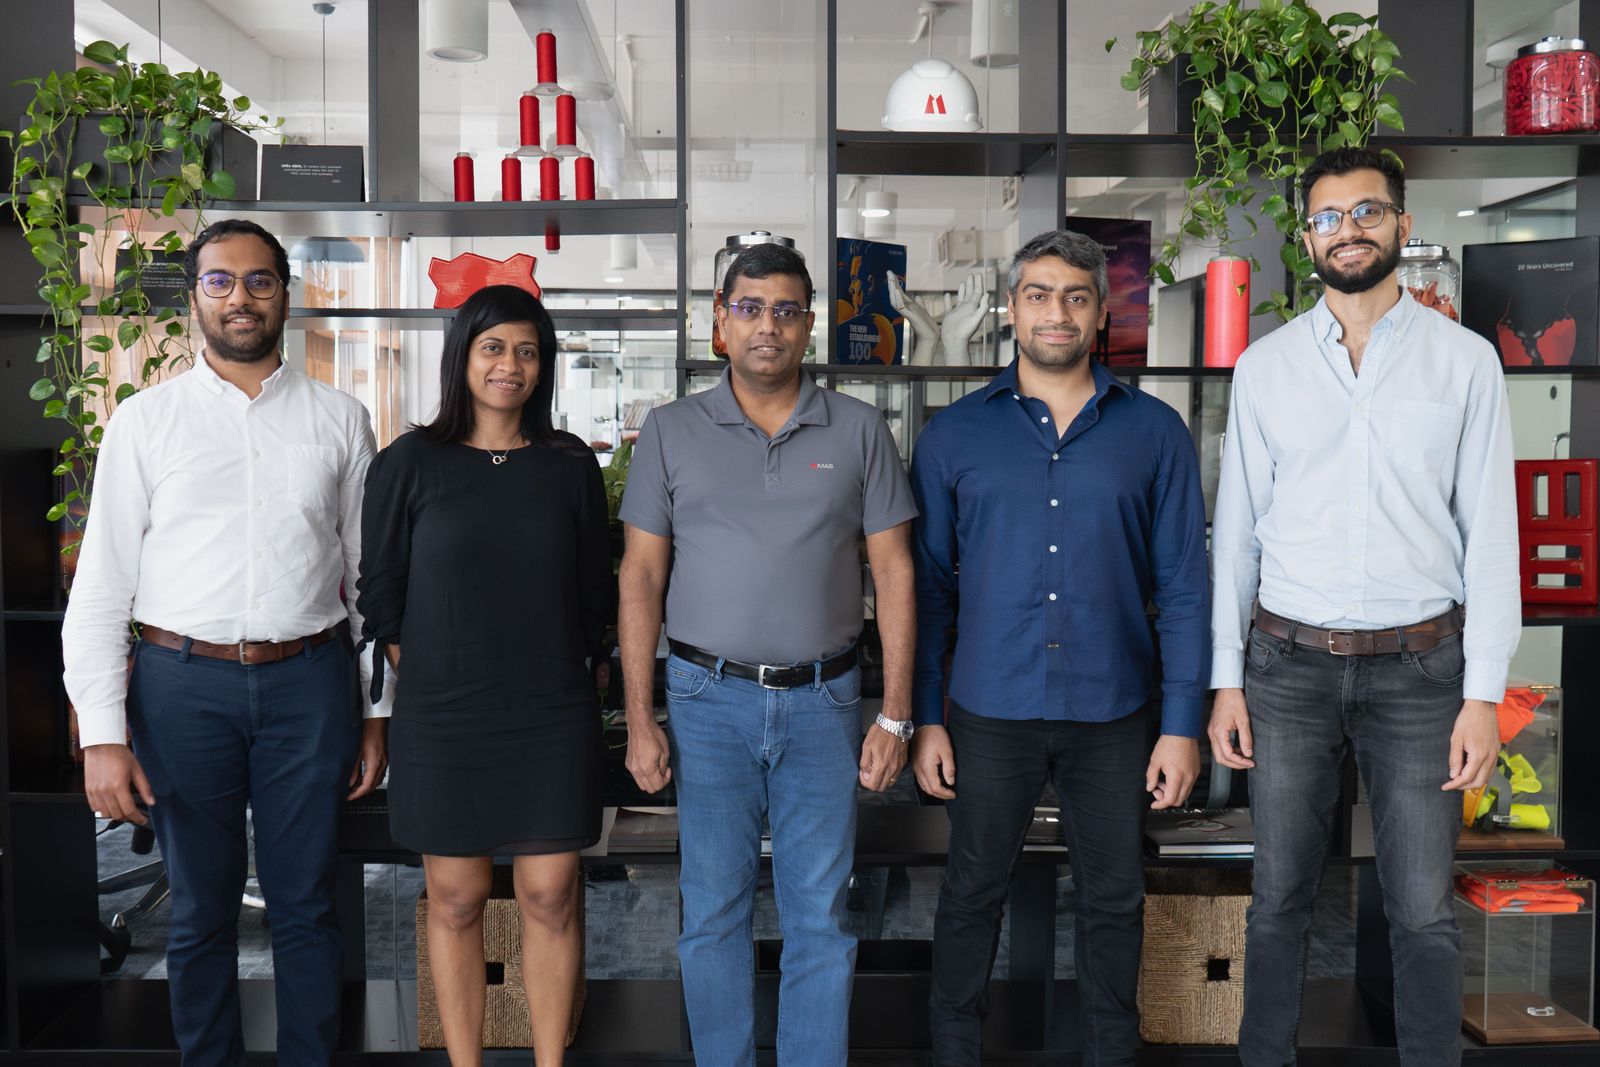 From left to right: Nipuna Gunaratne – Sustainable Product Lead, MAS Holdings; Nemanthie Kooragamage – Director, Group Sustainable Business, MAS Holdings; Suren Fernando – Chief Executive Officer, MAS Holdings, Shay Sethi, CEO & Co-founder, Ambercycle; and Moby Ahmed, CTO & Co-founder, Ambercycle)